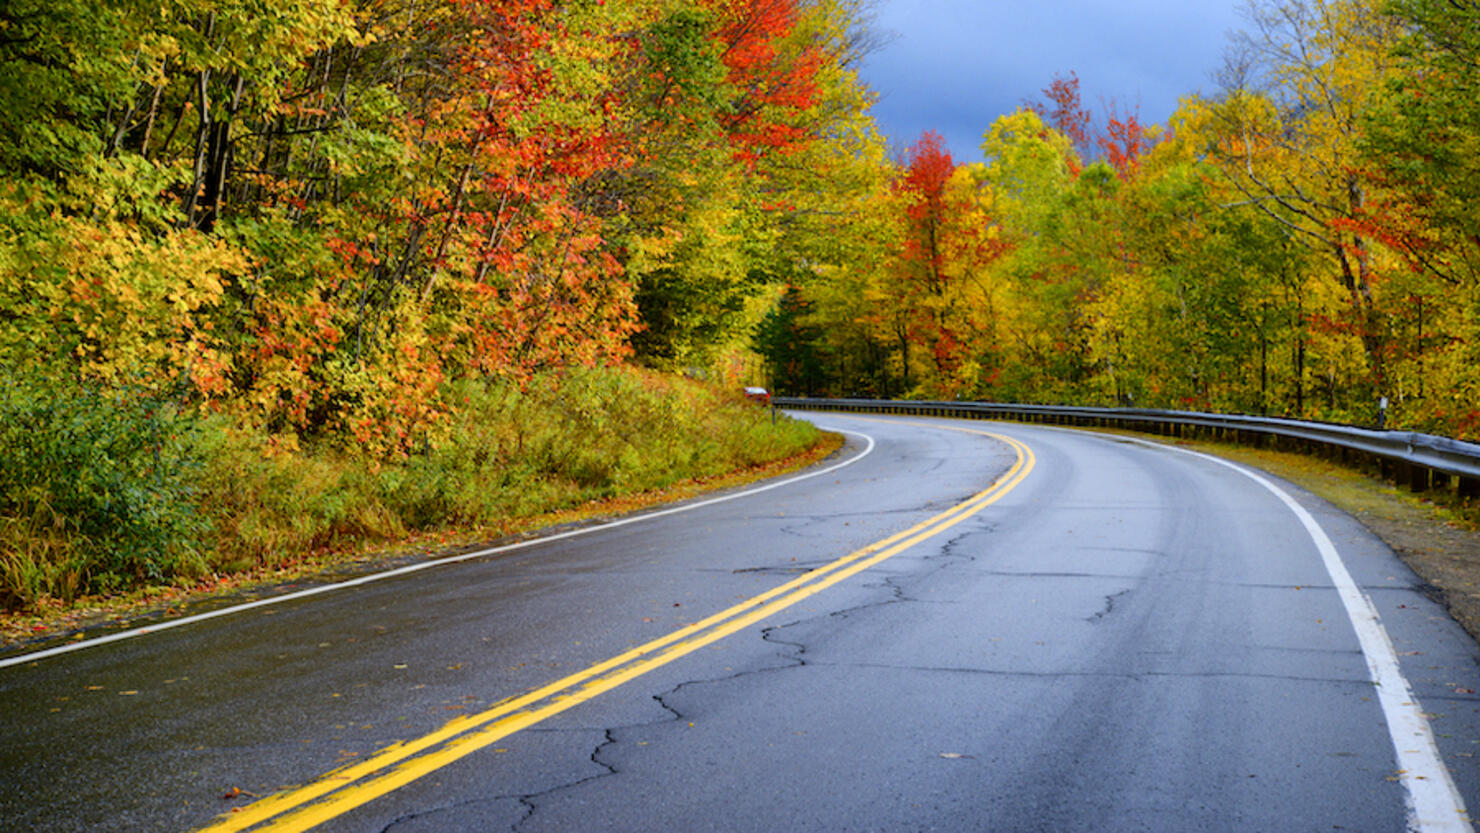 Road in Autumn foliage in New England